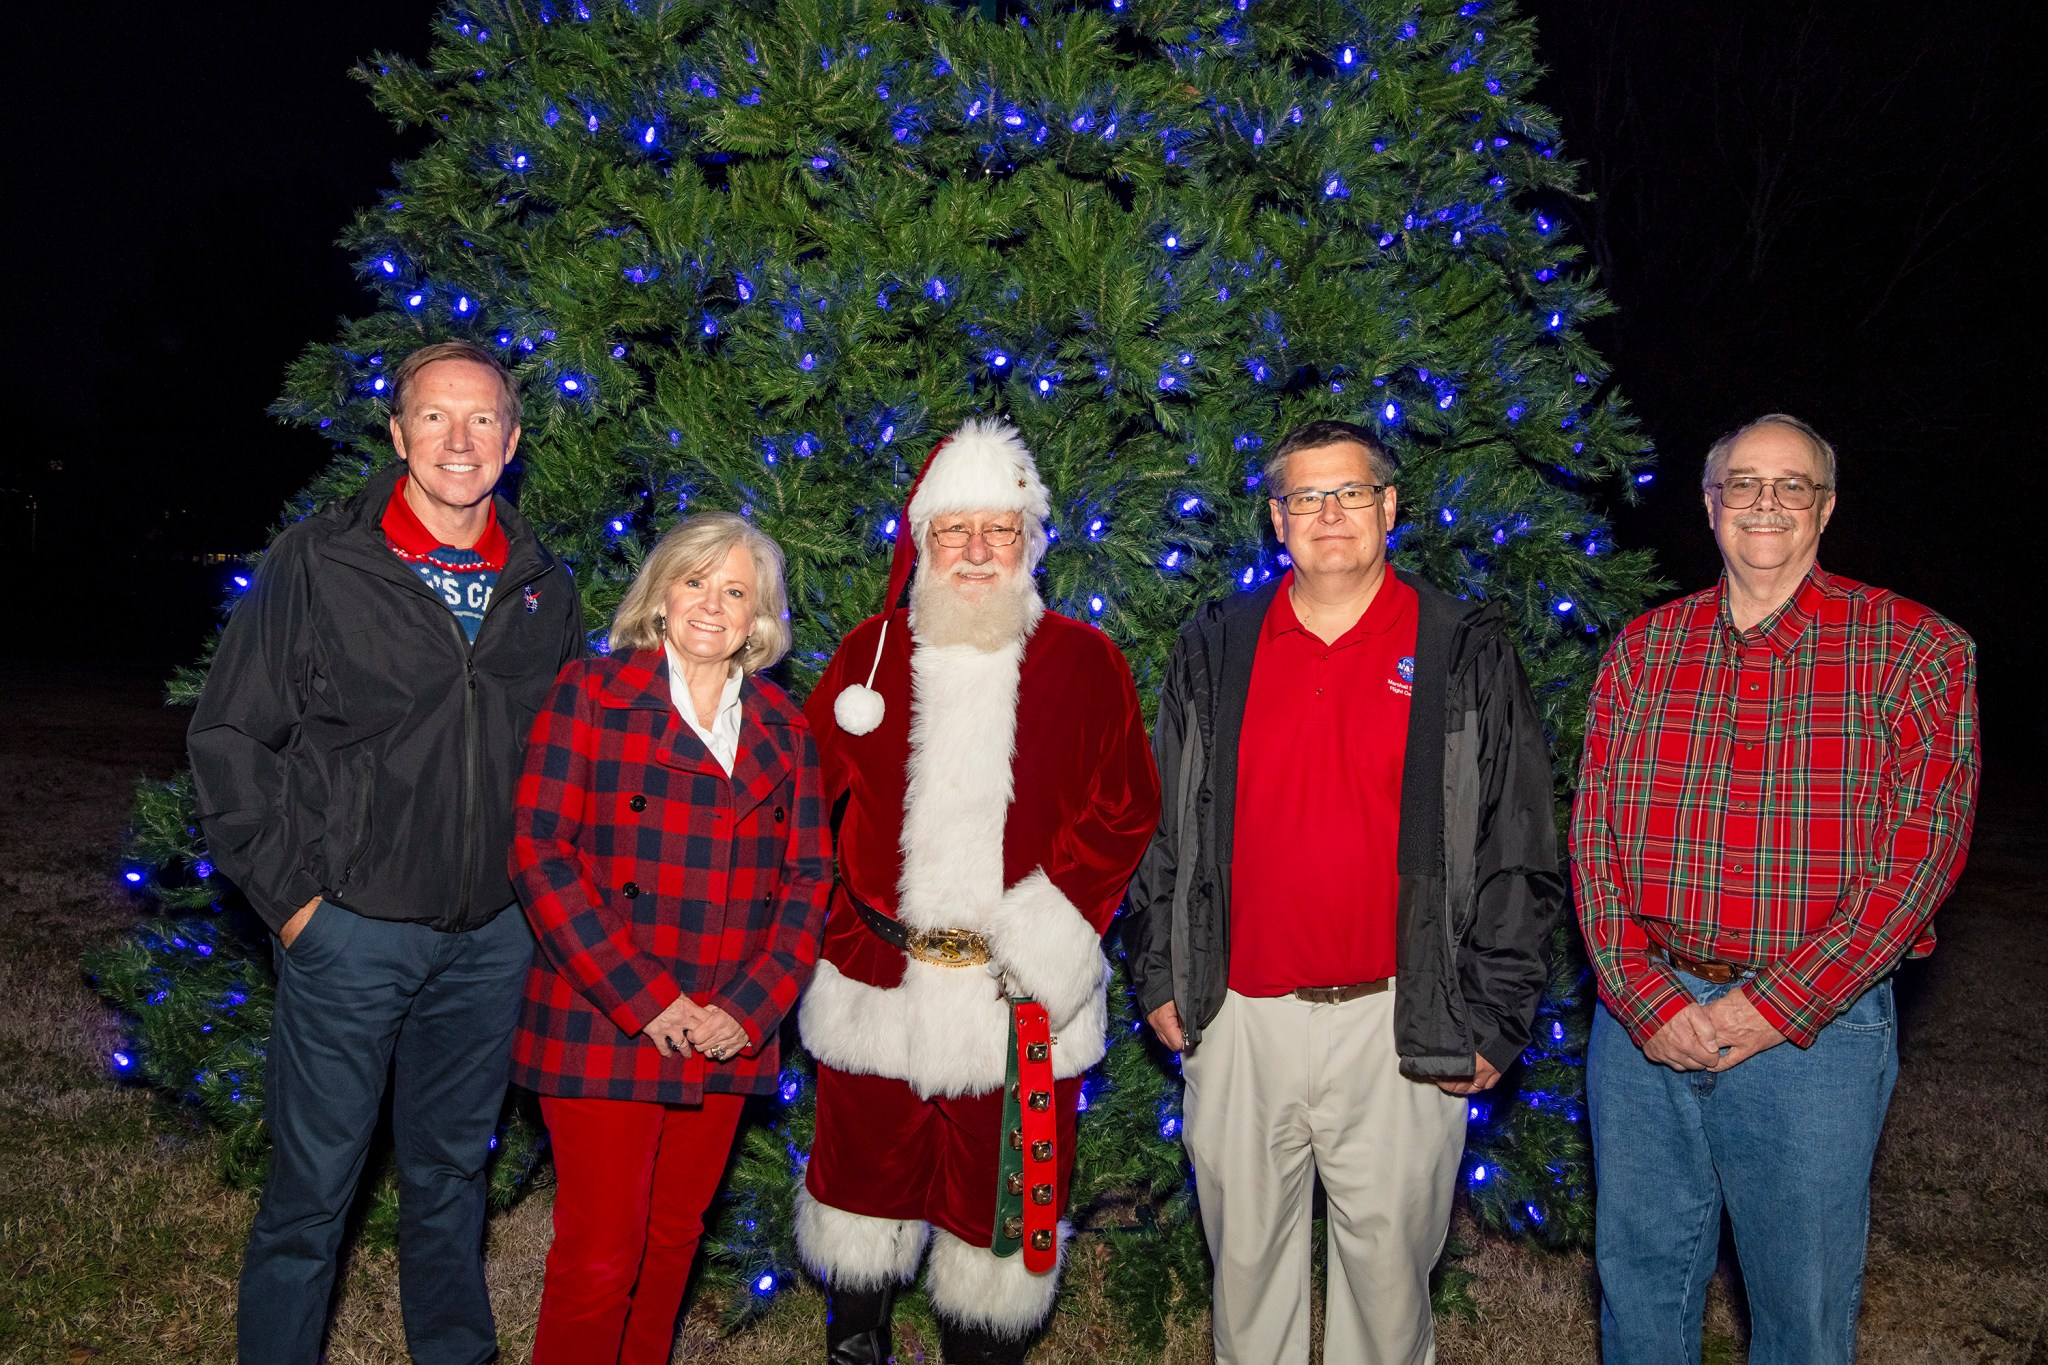 Taking part in the holiday tree lighting are, from left, Marshall Associate Director Steve Miley, Director Jody Singer, Santa Claus, Associate Director, Technical, Larry Leopard, and Deputy Director Rick Burt. 